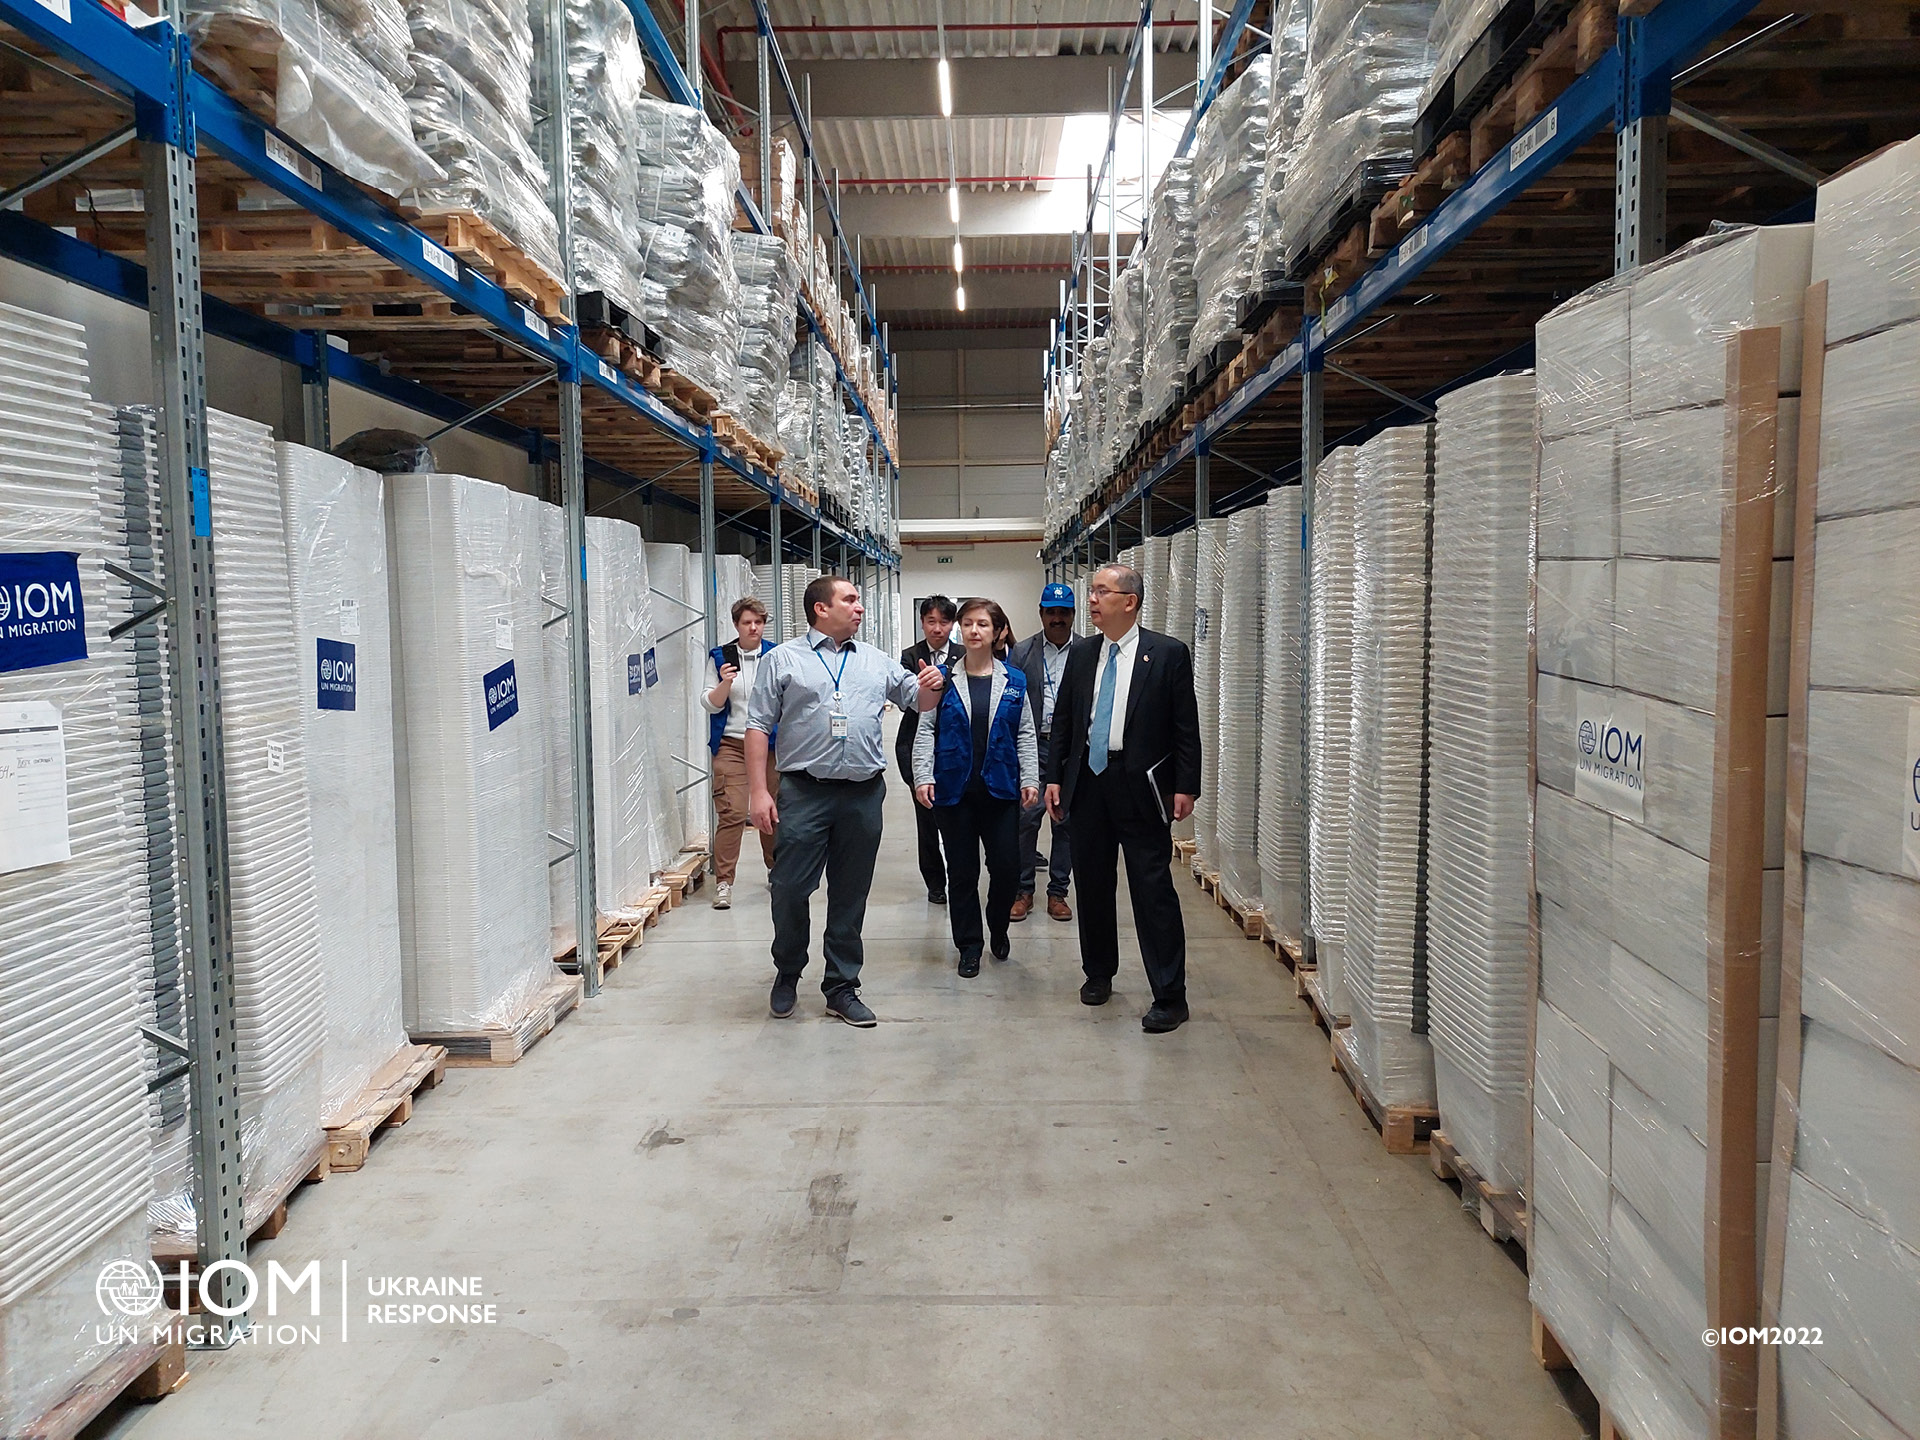 His Excellency visited IOM Supply Chain Hub in Košice. From its warehouse, IOM delivers the vital humanitarian aid directly to cities and people affected by the war in Ukraine. Photo © International Organization for Migration (IOM) 2022.